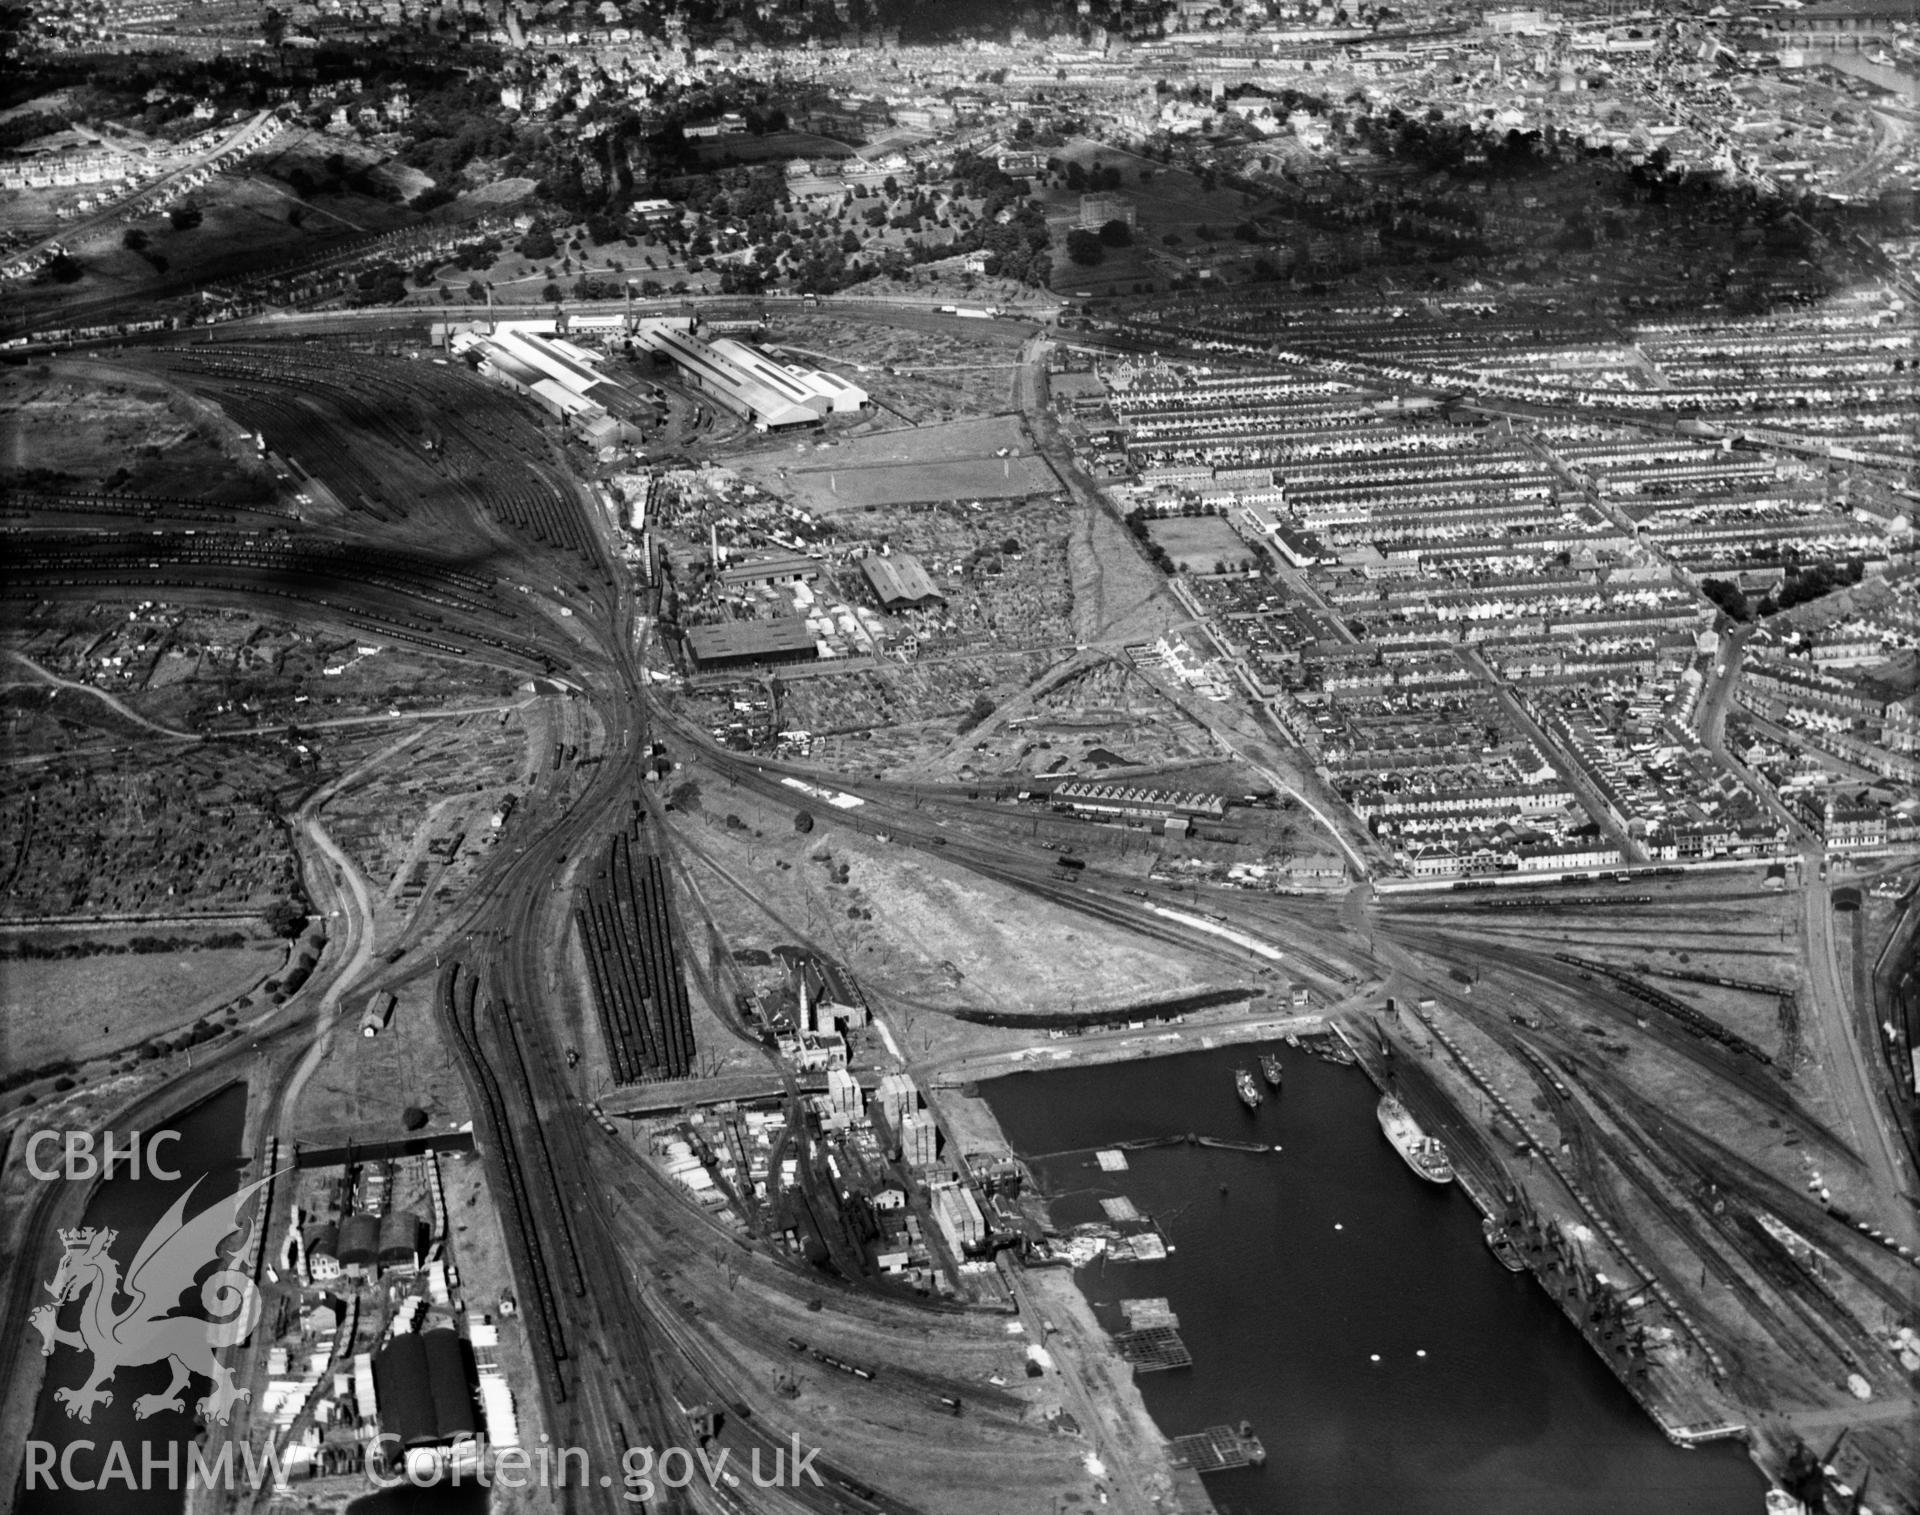 General view of Newport showing docks, oblique aerial view. 5?x4? black and white glass plate negative.